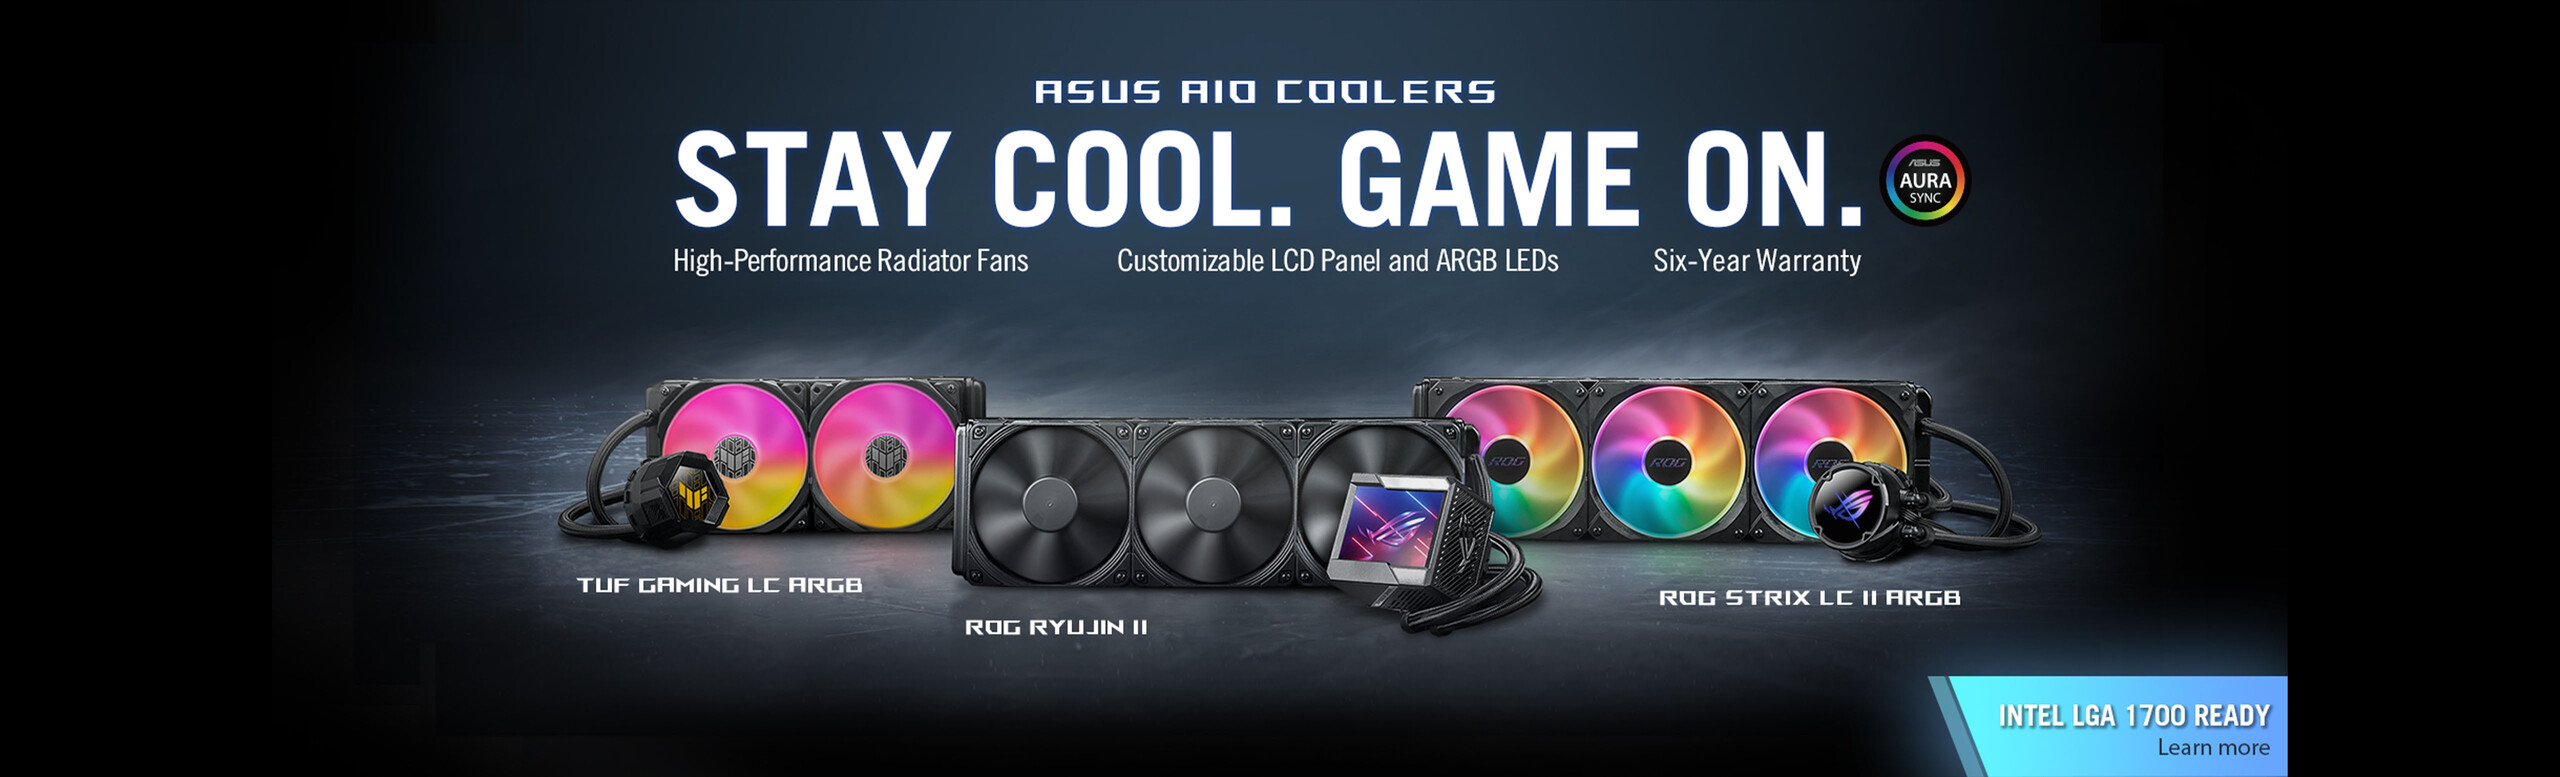 Offering a variety of models for every type of gamer, ASUS AIO coolers combine incredible performance to keep thermals in check